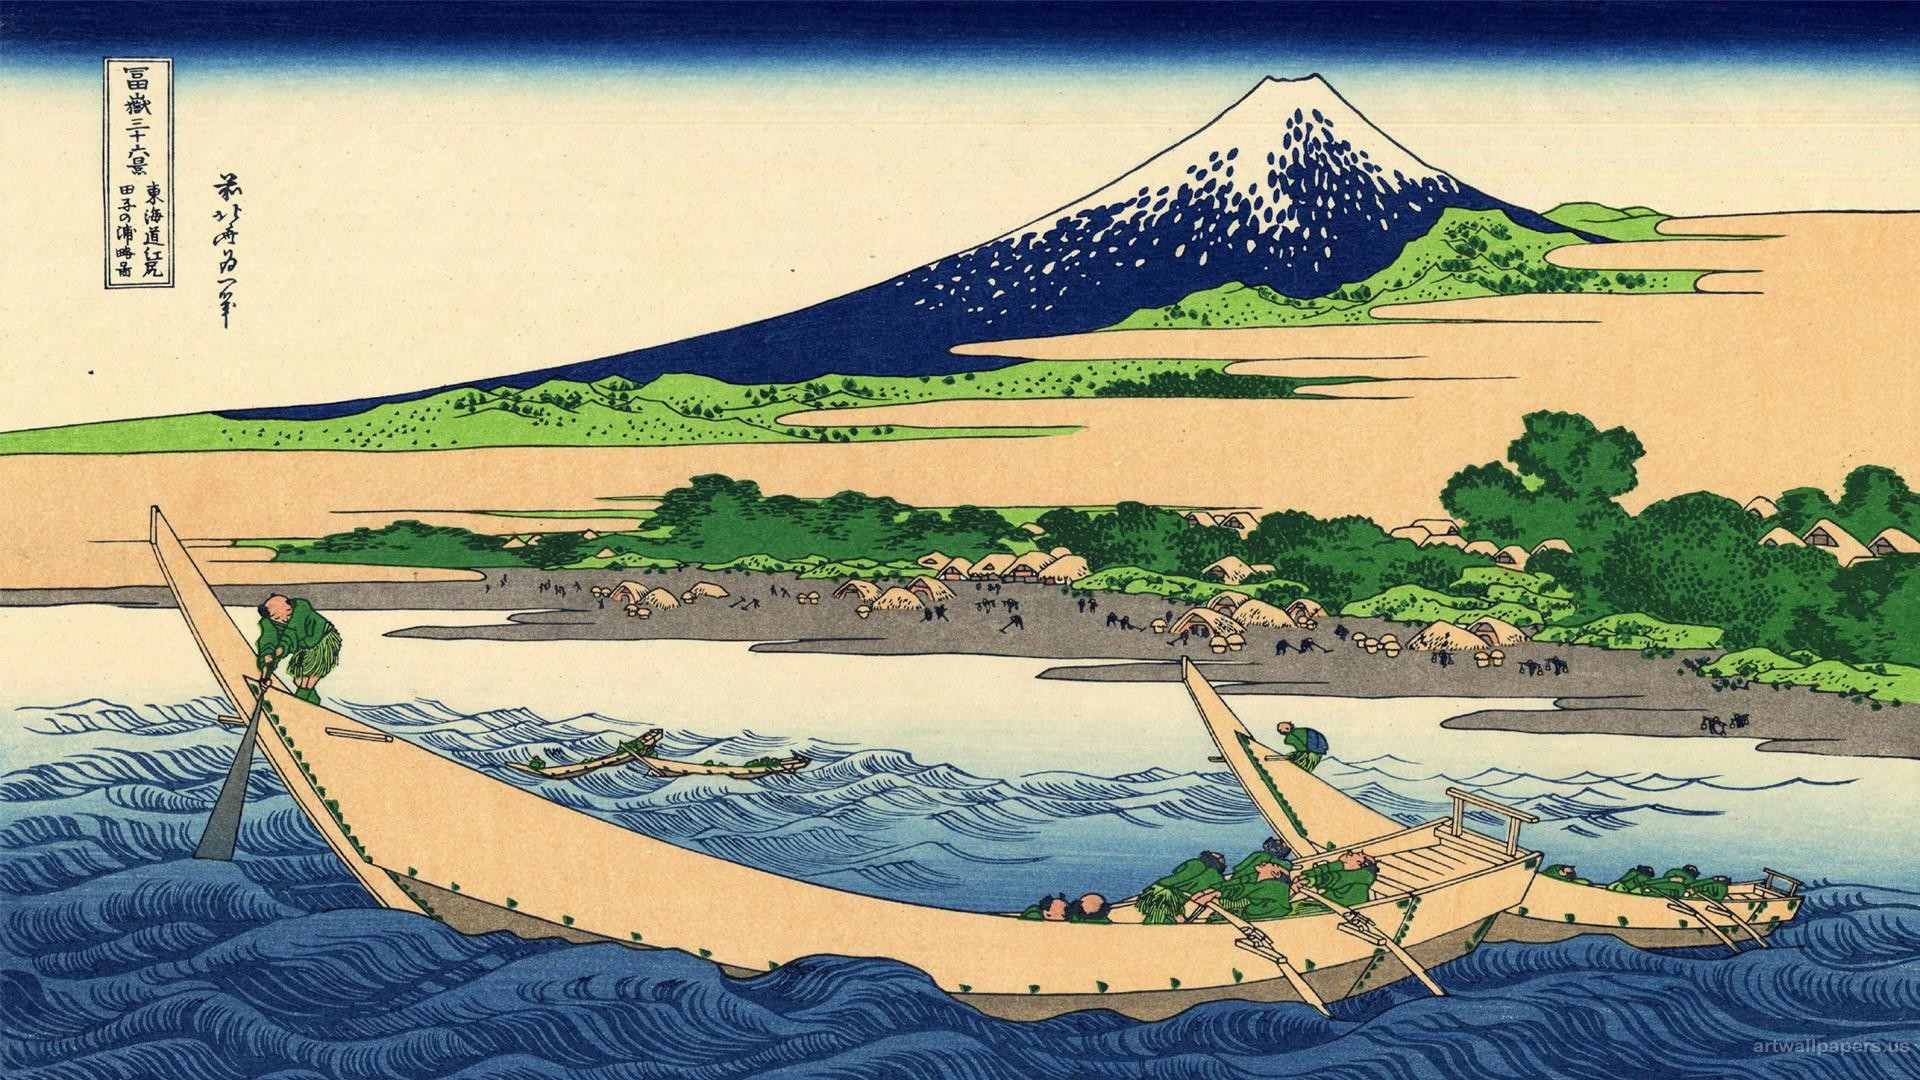 1920x1080 the great wave wallpaper #829024